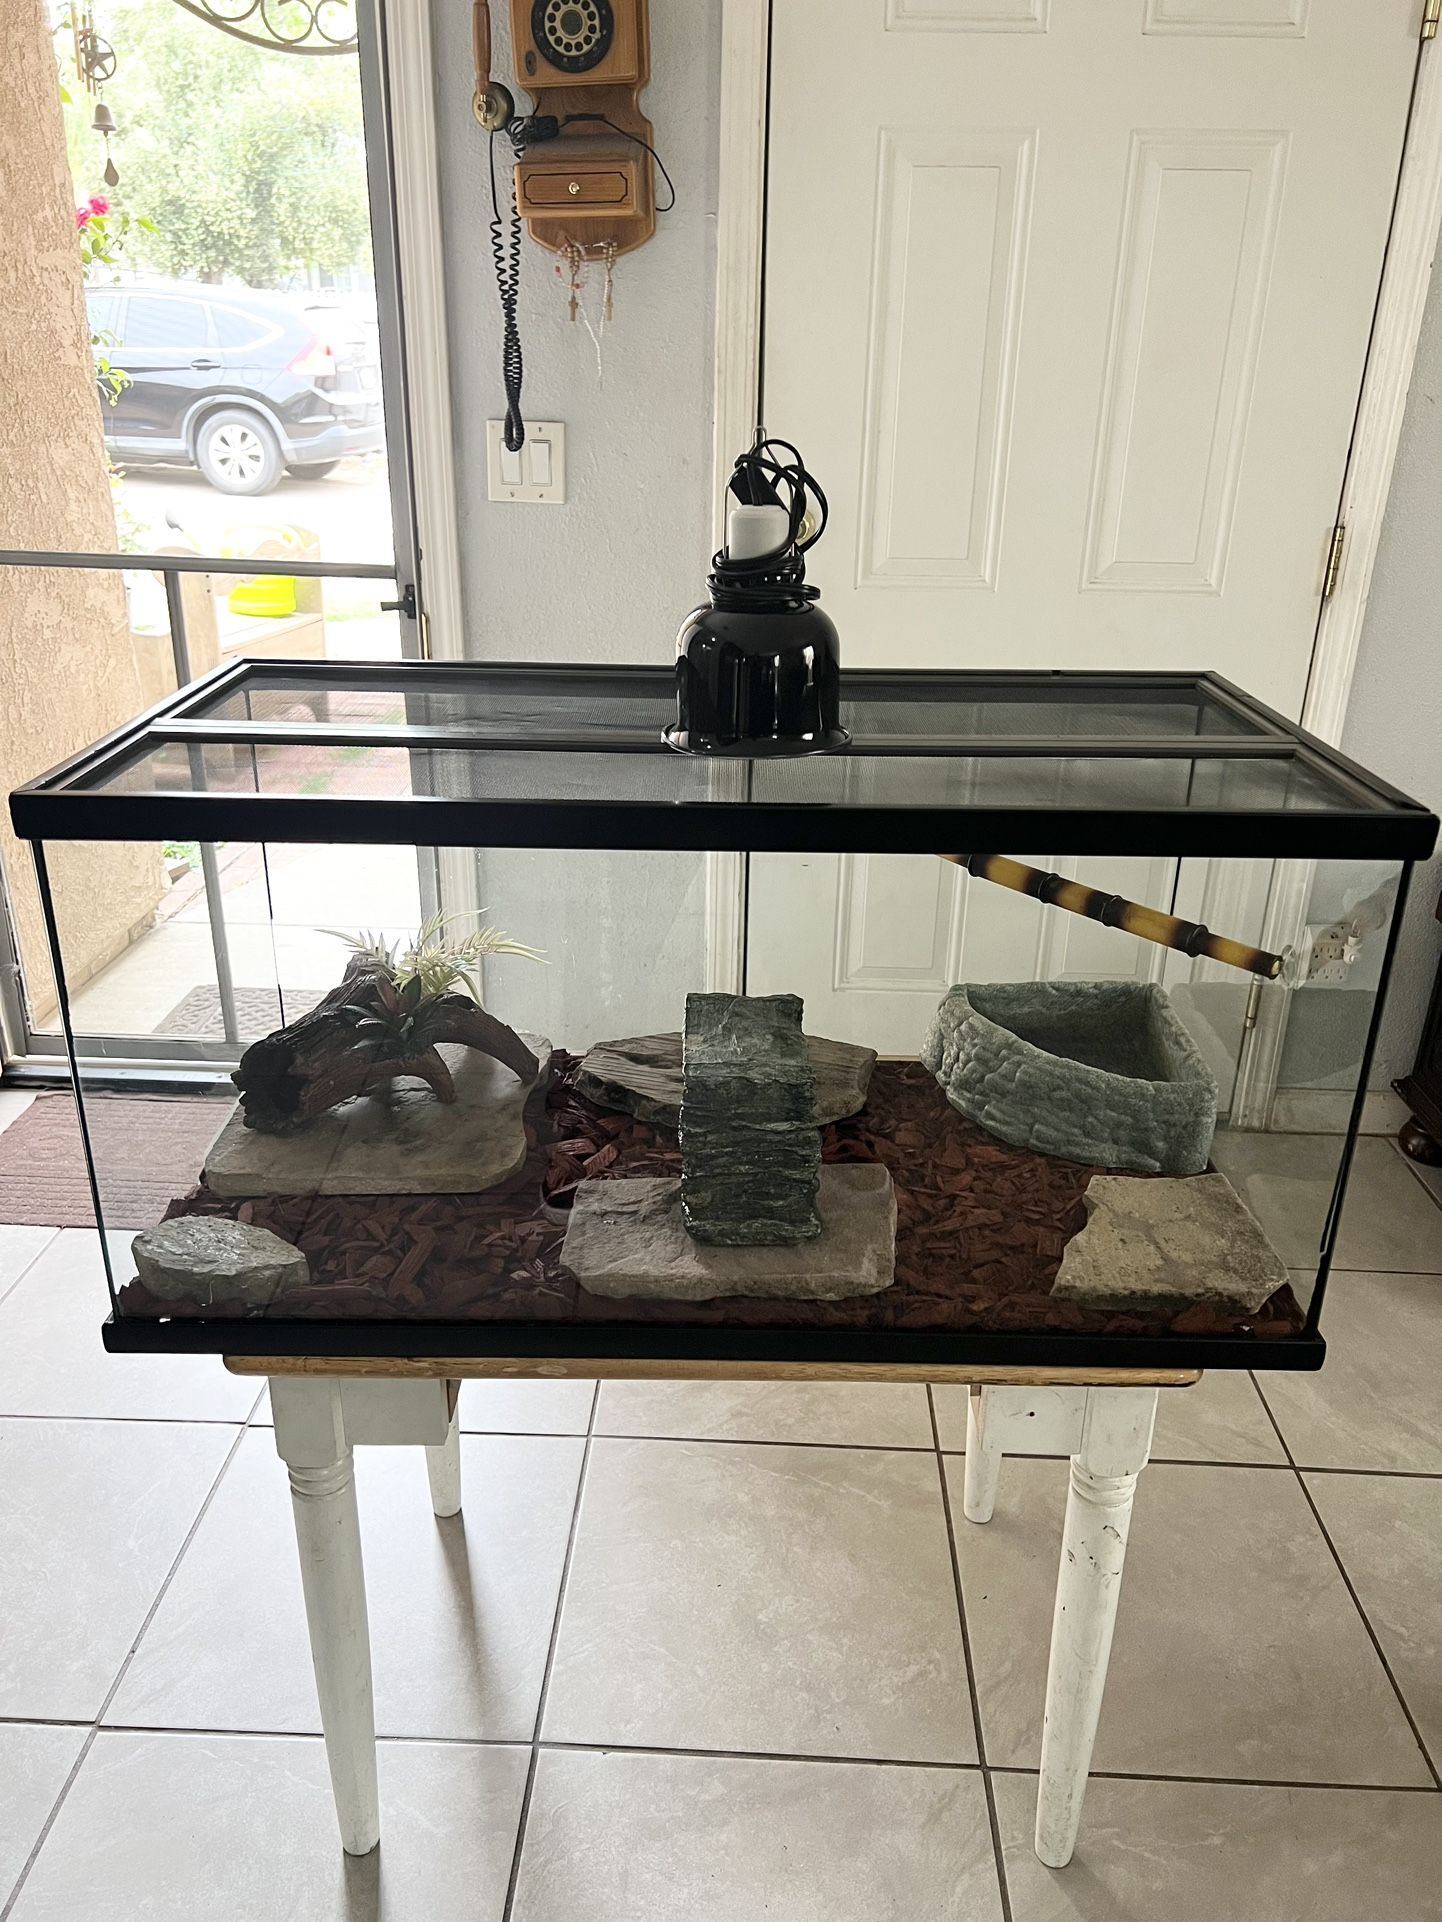 Reptile/Terrarium/Aquarium Tank 50 Gallons With All Decorations And Set Up ( I Have More Tanks Available )*** Great Condition ***  * Today Only $100 *